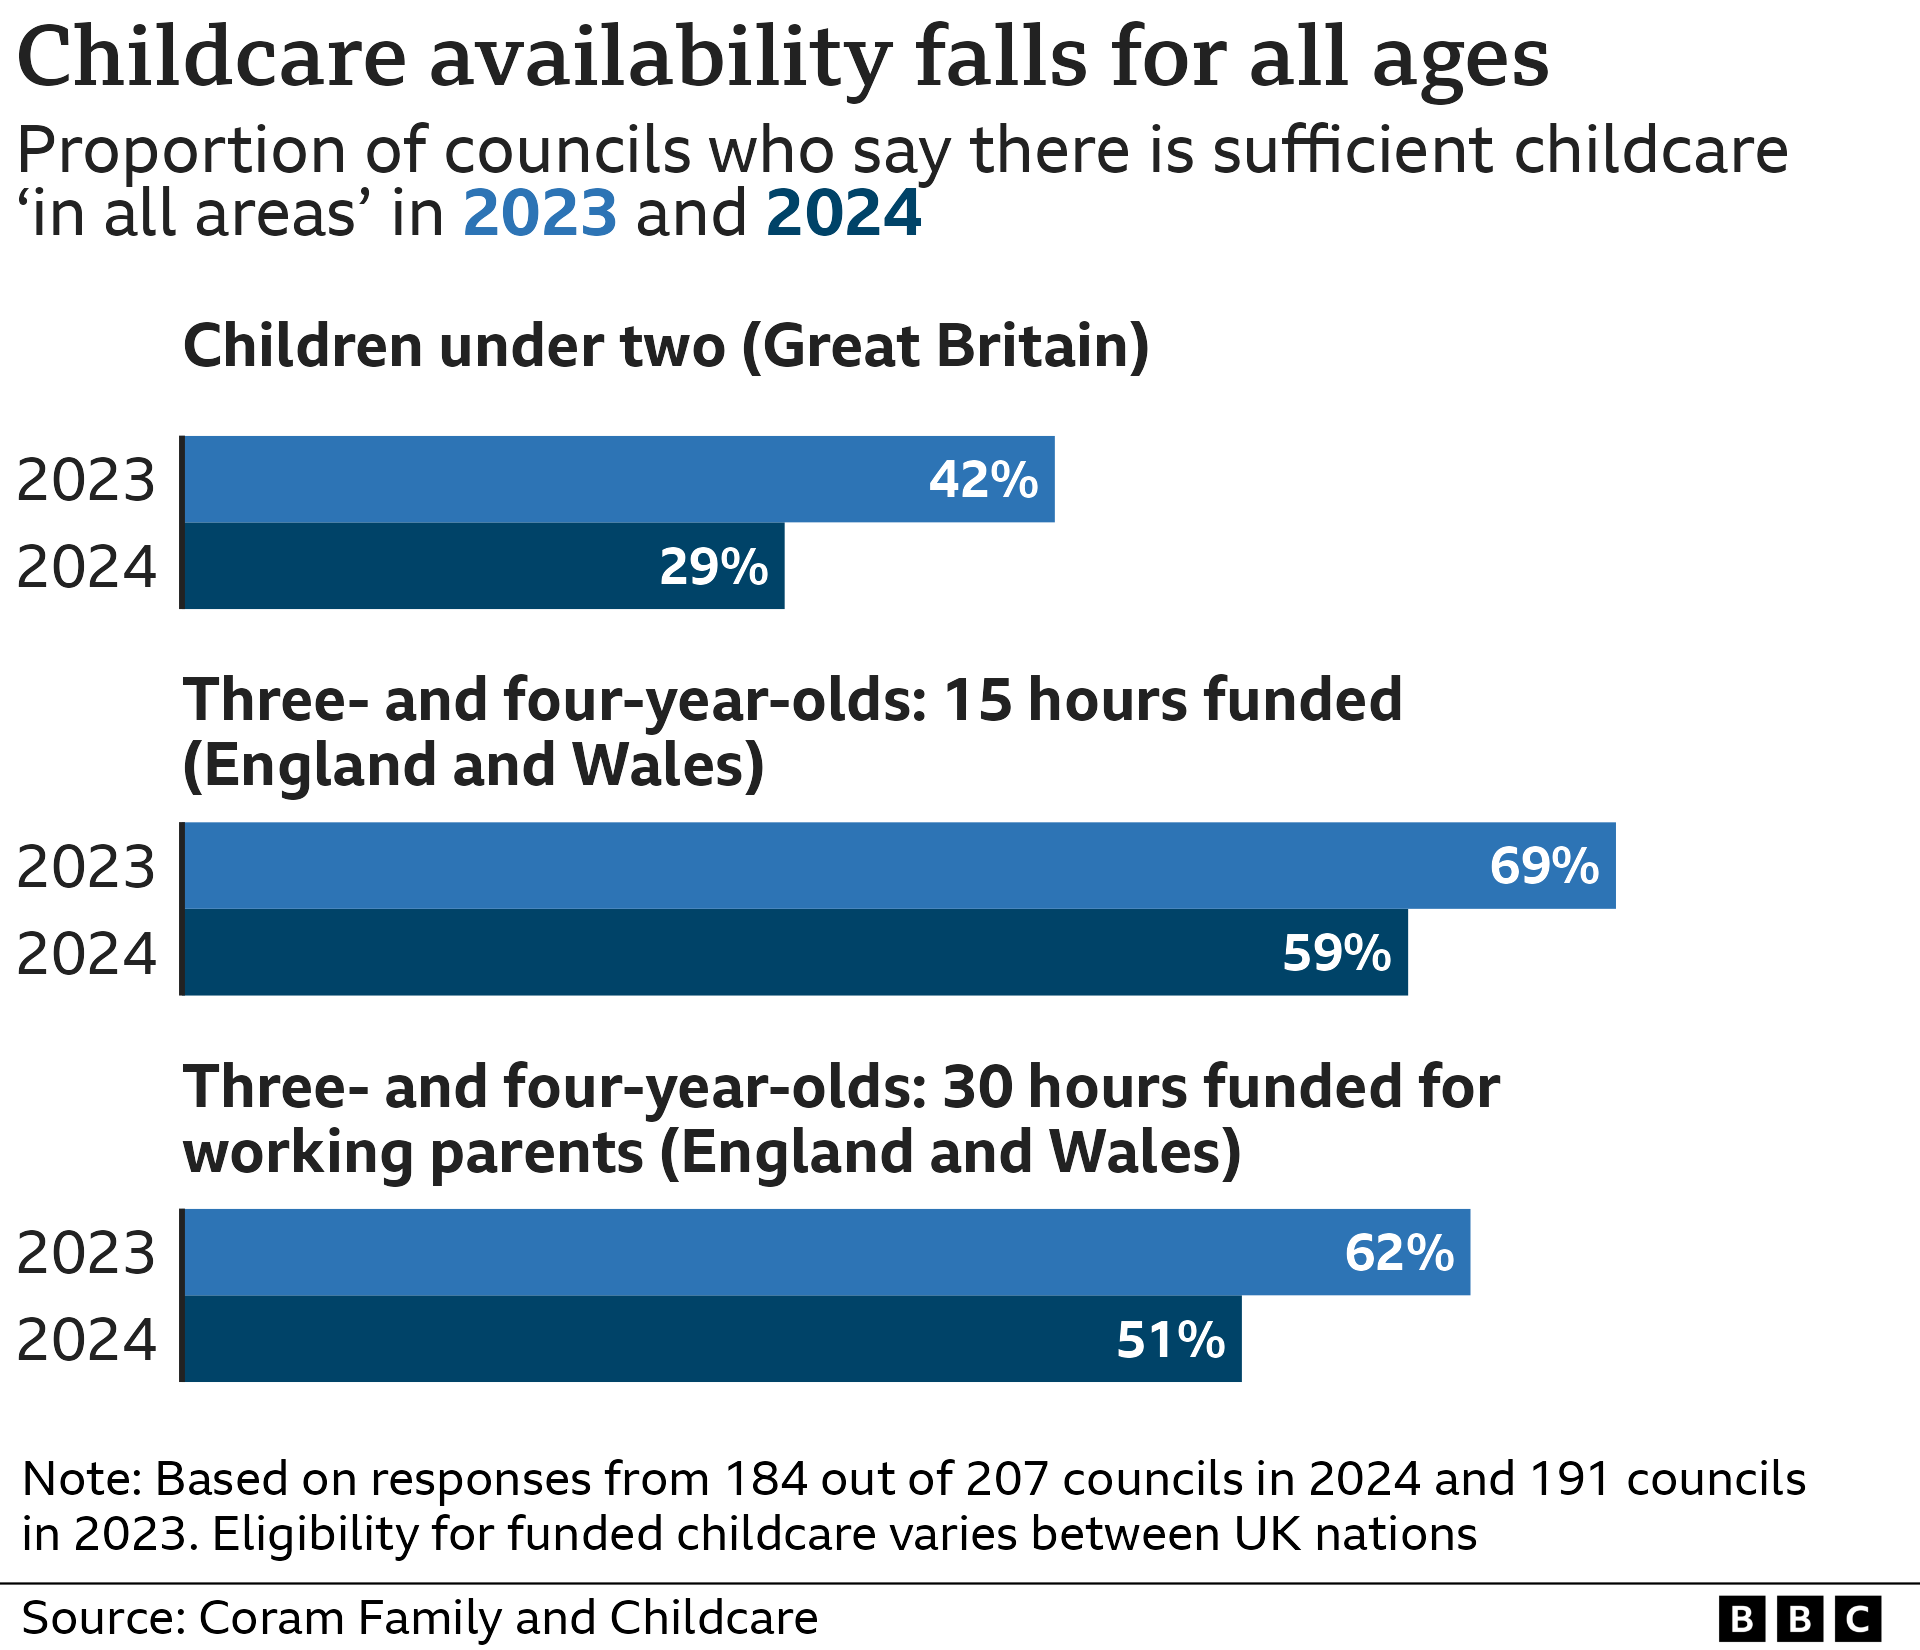 Bar chart showing falling availability of childcare in Great Britain between 2023 and 2024. 29% of councils in GB say there is sufficient childcare for children under two (down from 42%); 59% of councils in England and Wales say there is enough to provide 15 hours of funded childcare (down from 69%); 51% of councils in England and Wales say there is sufficient childcare to provide 30 hours of funded childcare for children of working parents (down from 62%.